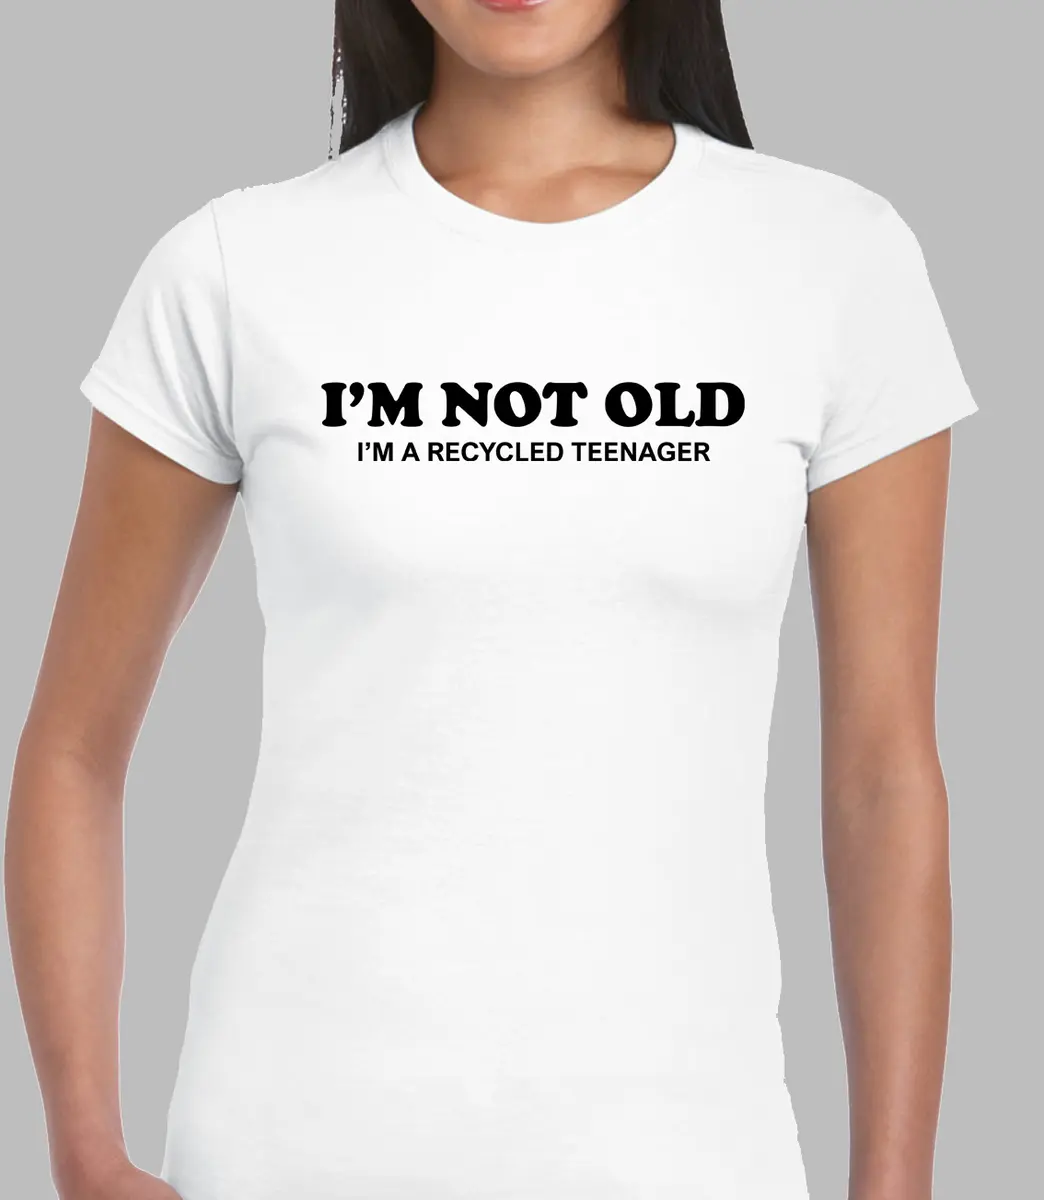 dawn lacour recommends Funny Old Lady T Shirts